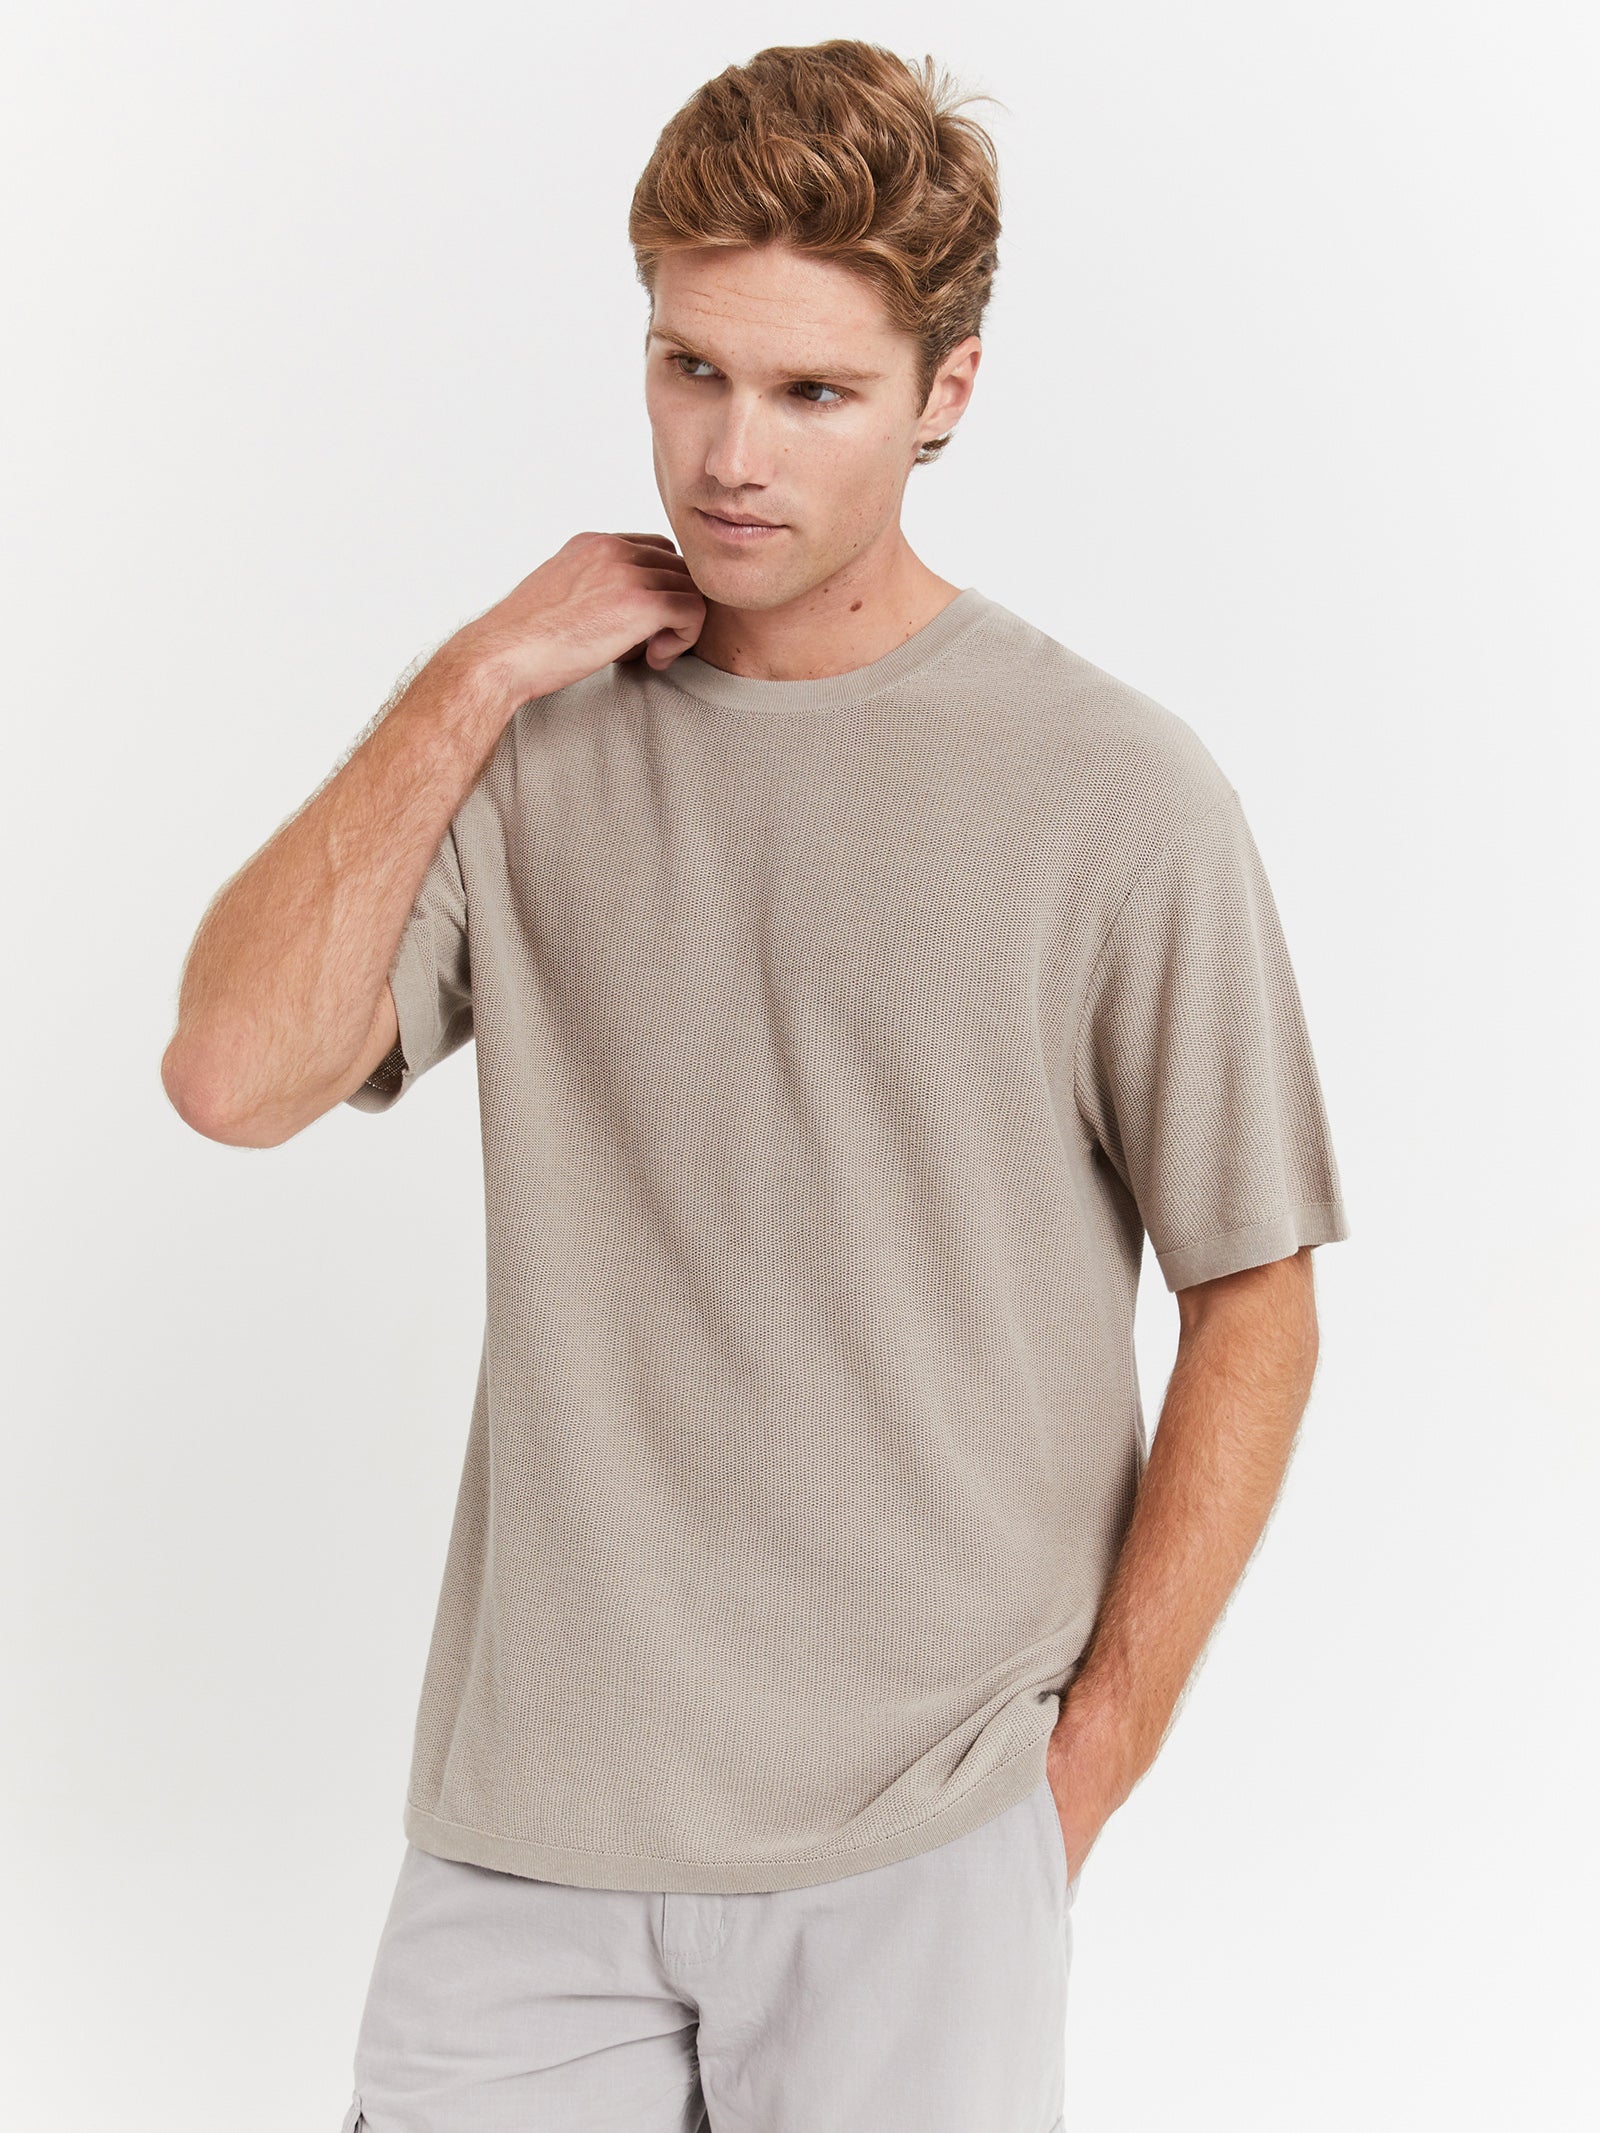 Hector Knit T-Shirt in Grey